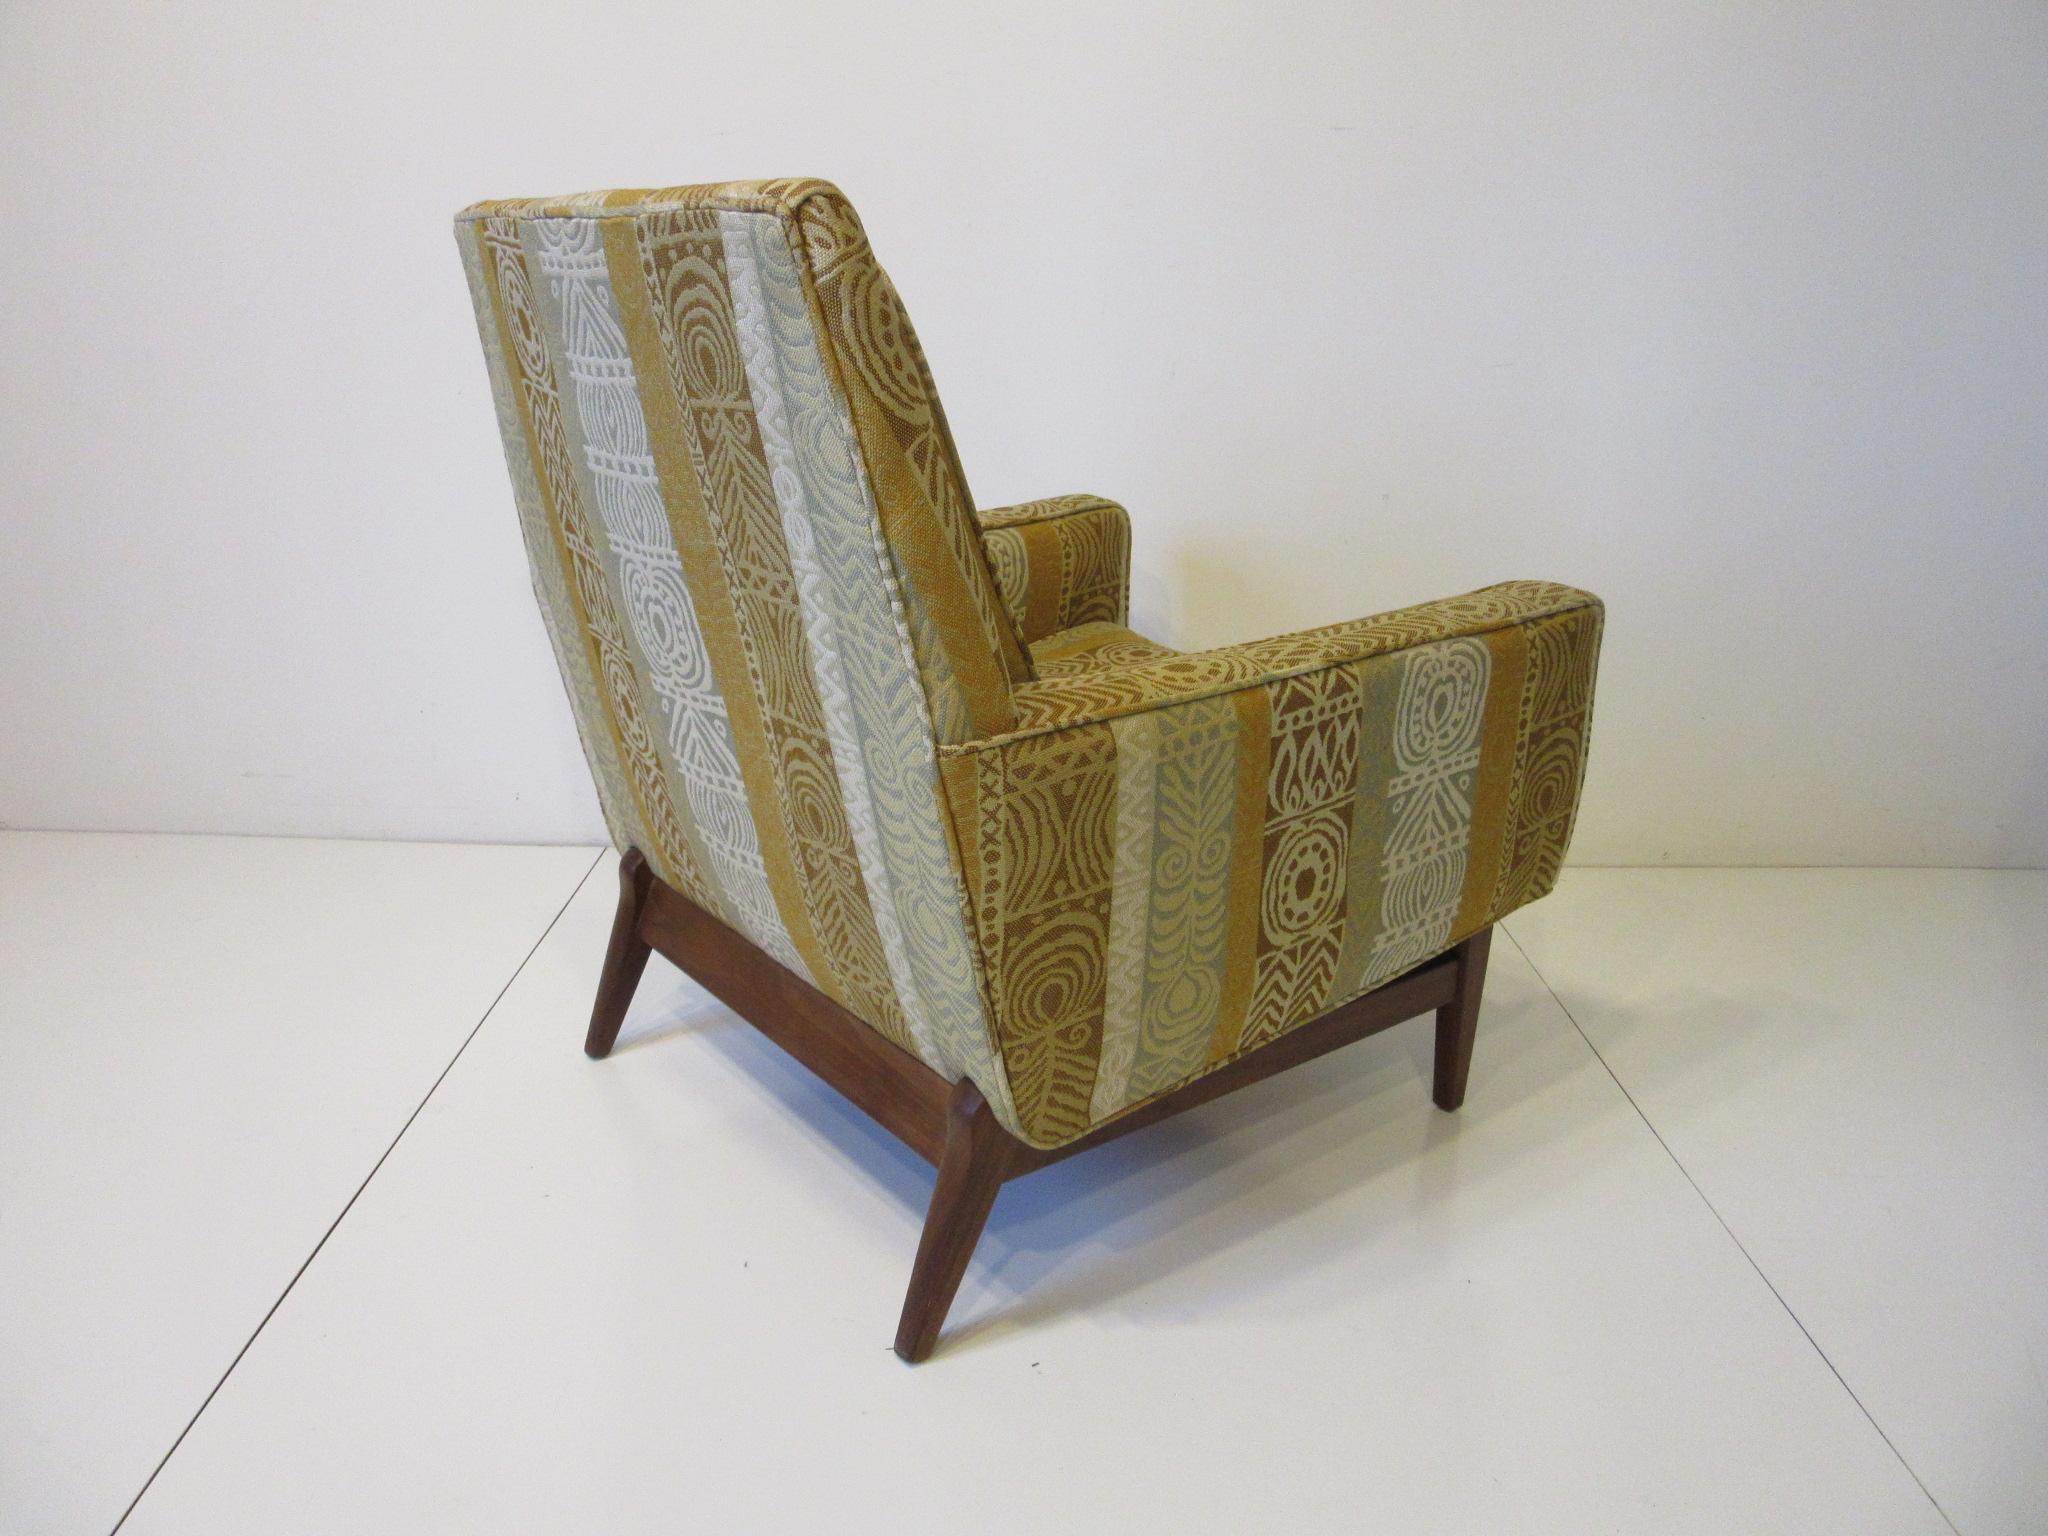 North American Lounge Chairs in the Style of Harvey Probber or Midcentury